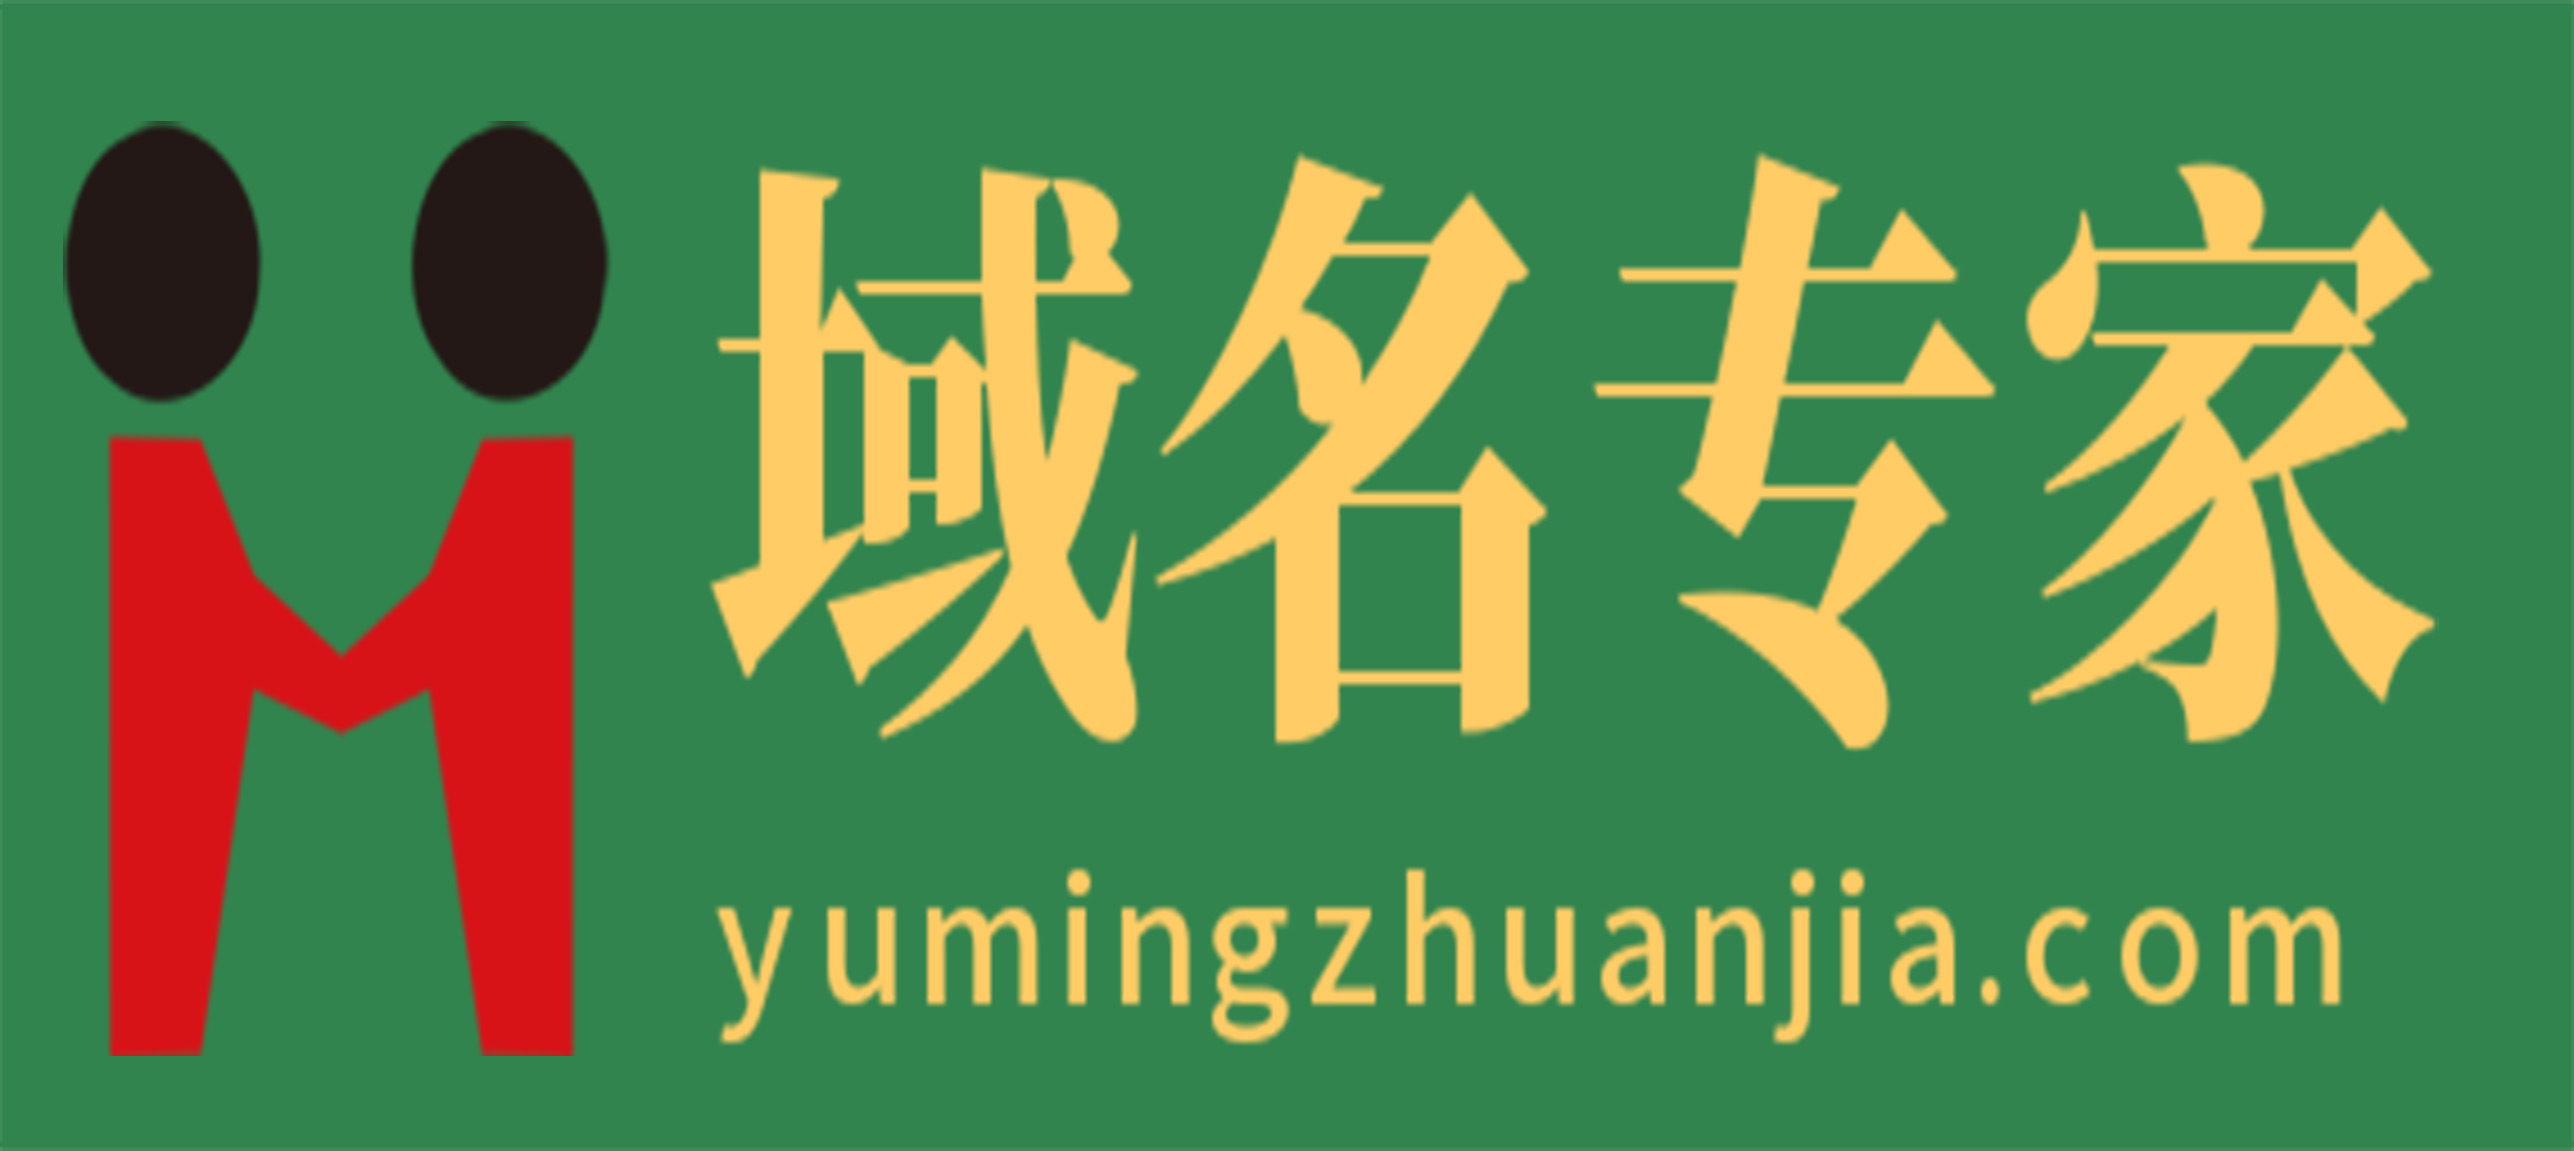  Domain name experts www.yumingzhuanjia.com - Domain name experts can help you find the right domain name for you whether you are starting a business, upgrading a brand or protecting intellectual property!